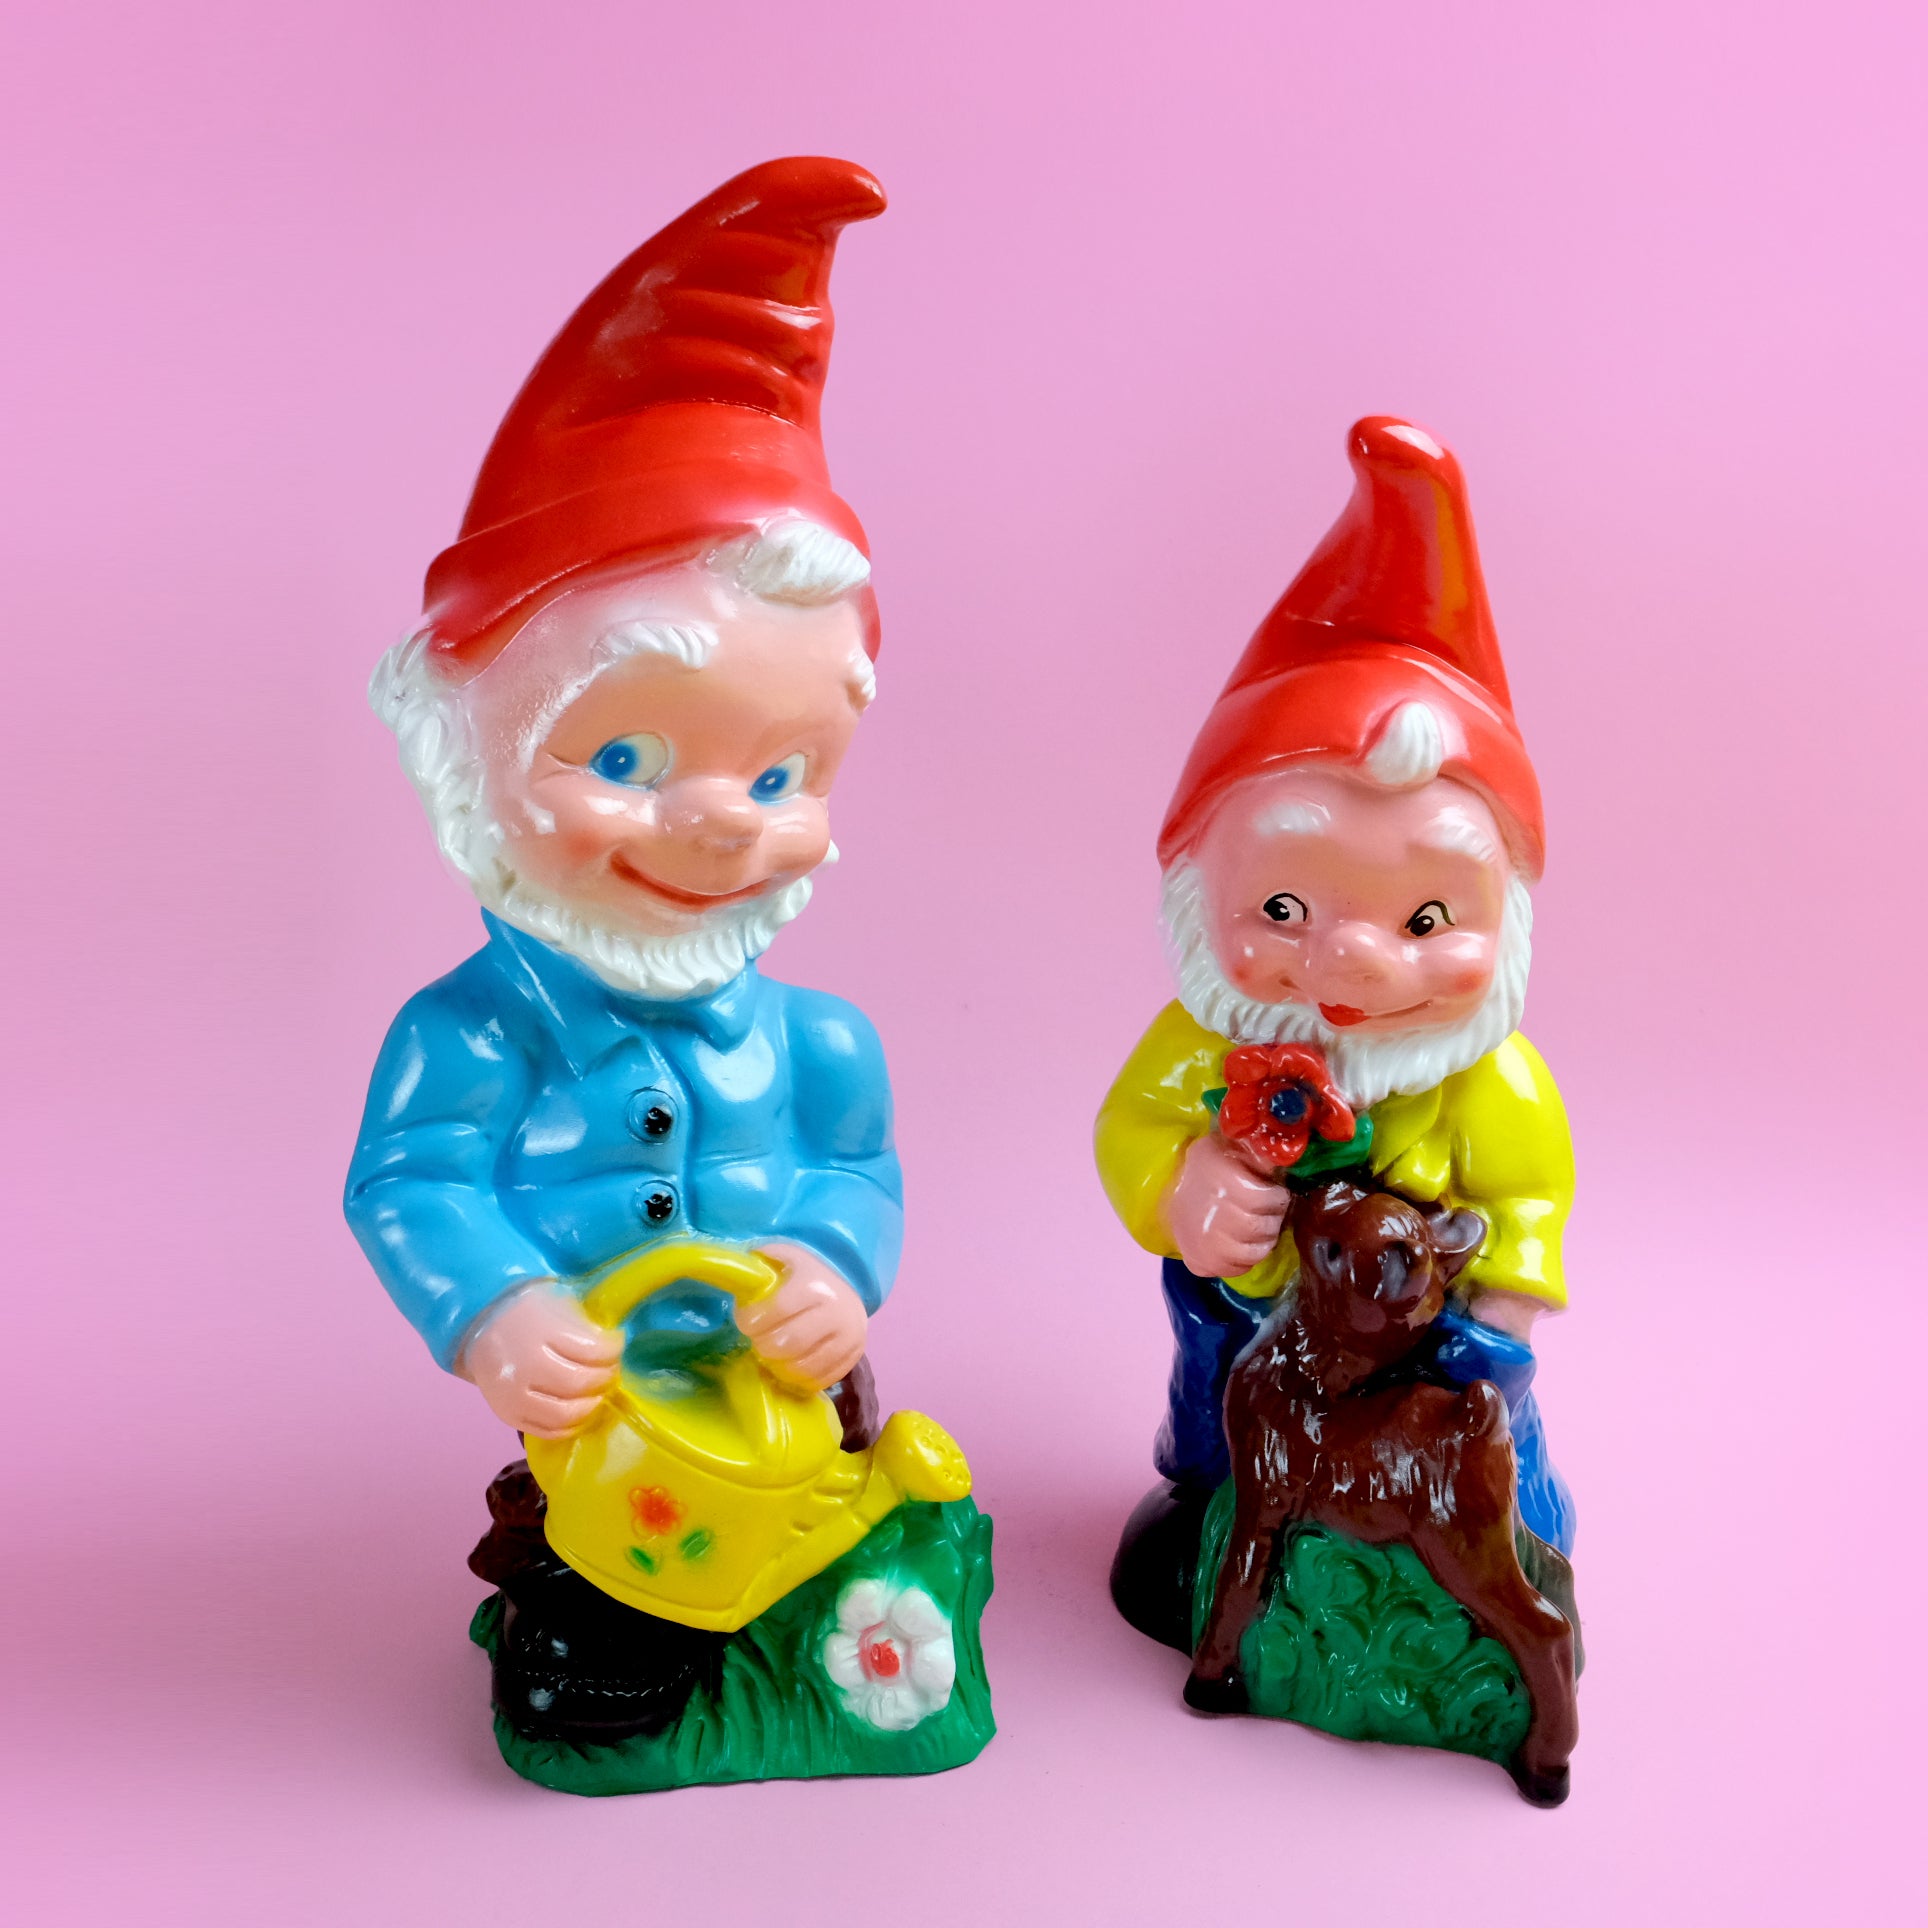 Garden gnome with yellow watering pot